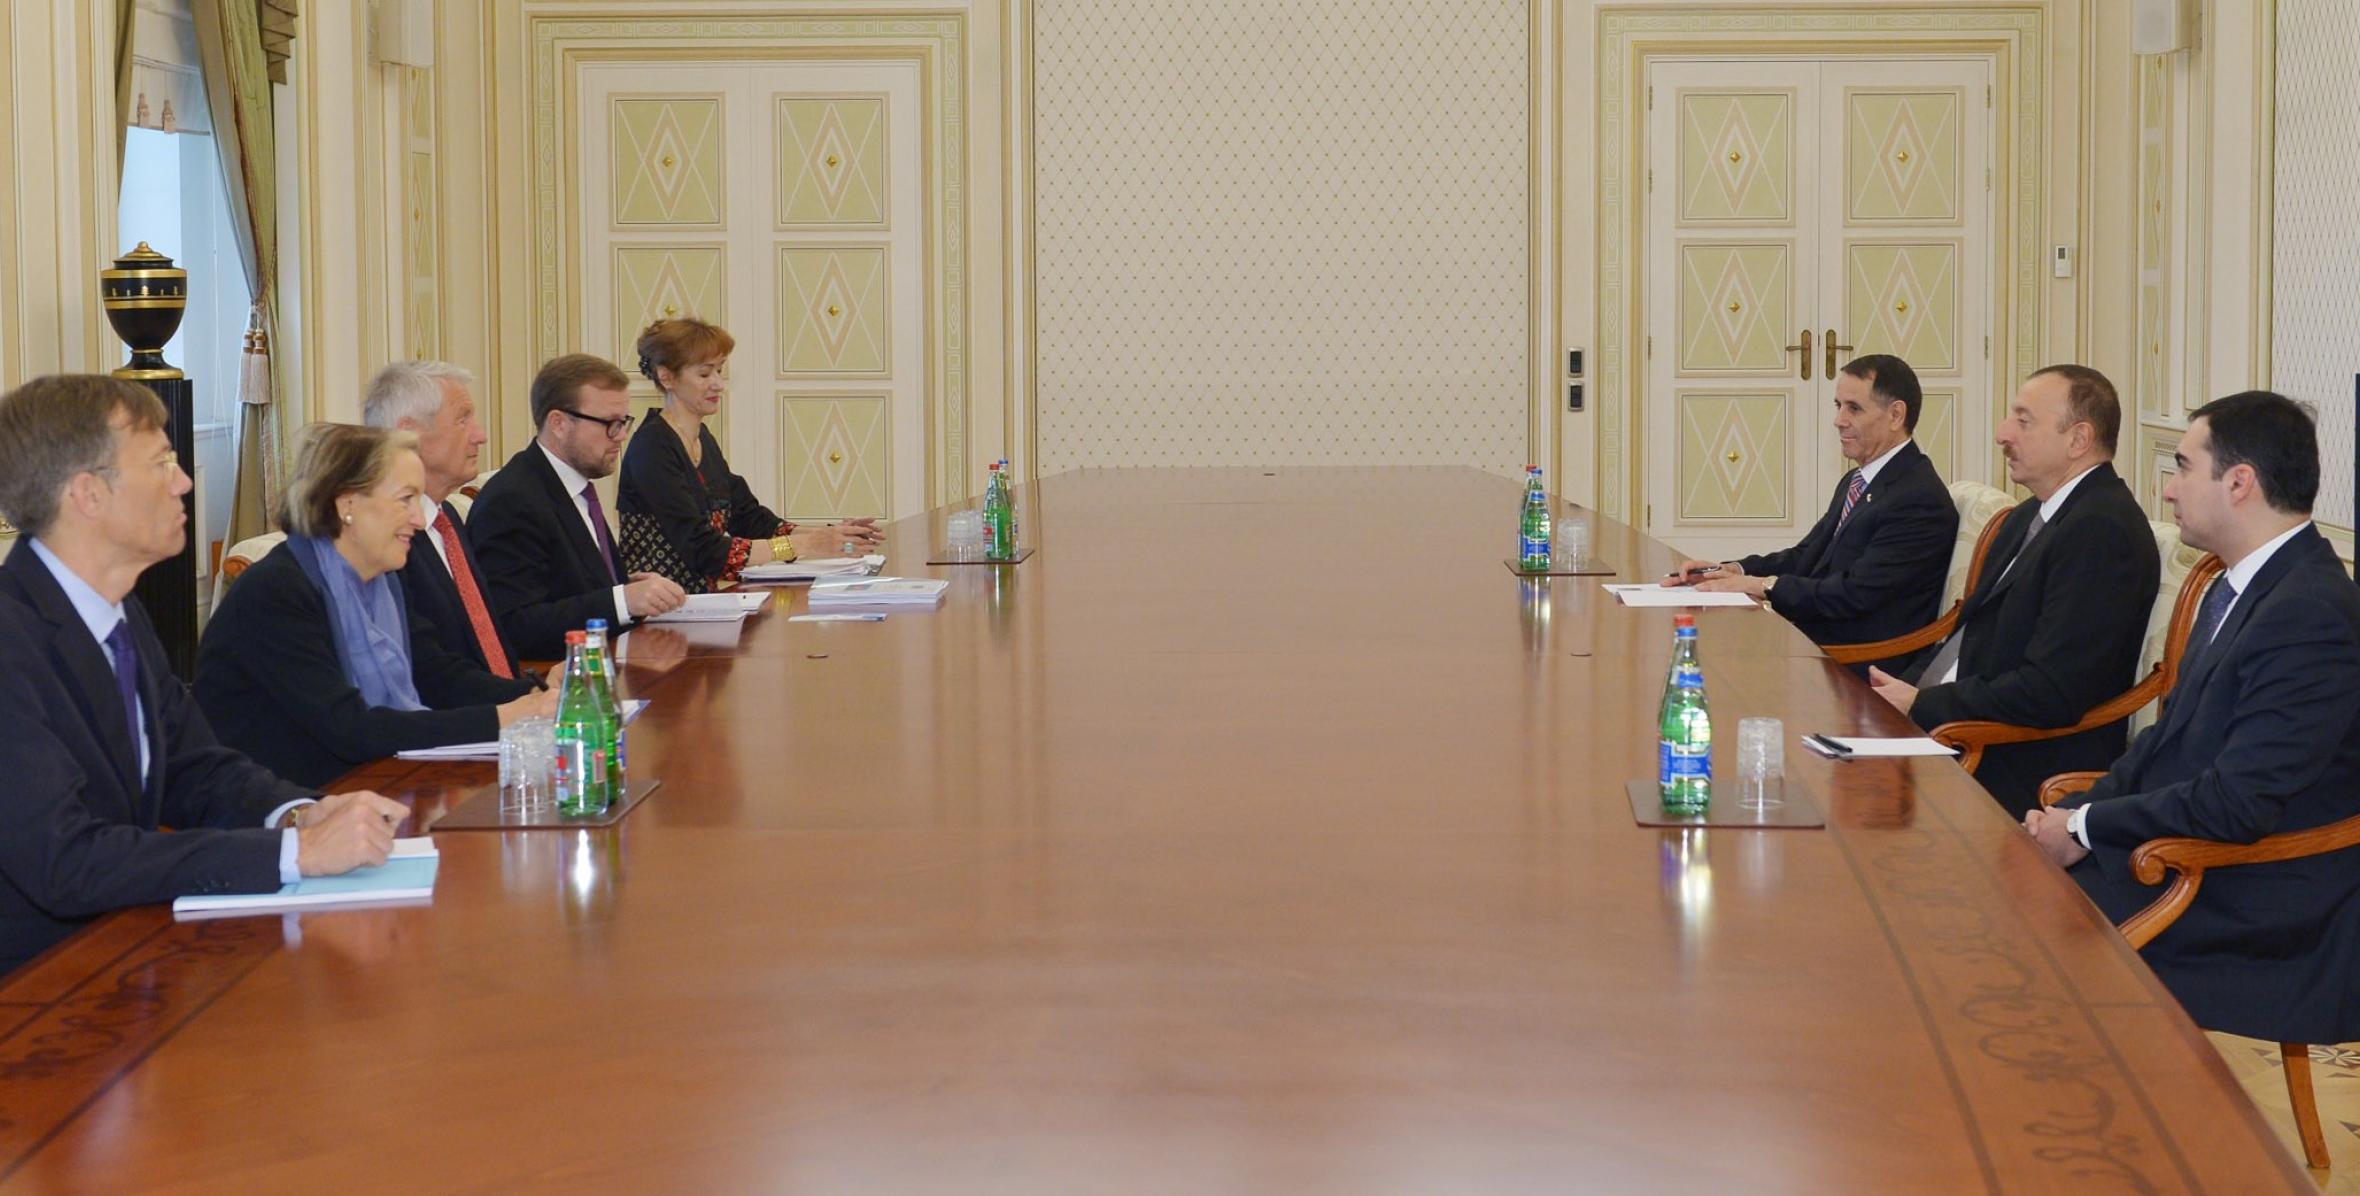 Ilham Aliyev received the Secretary General of the Council of Europe